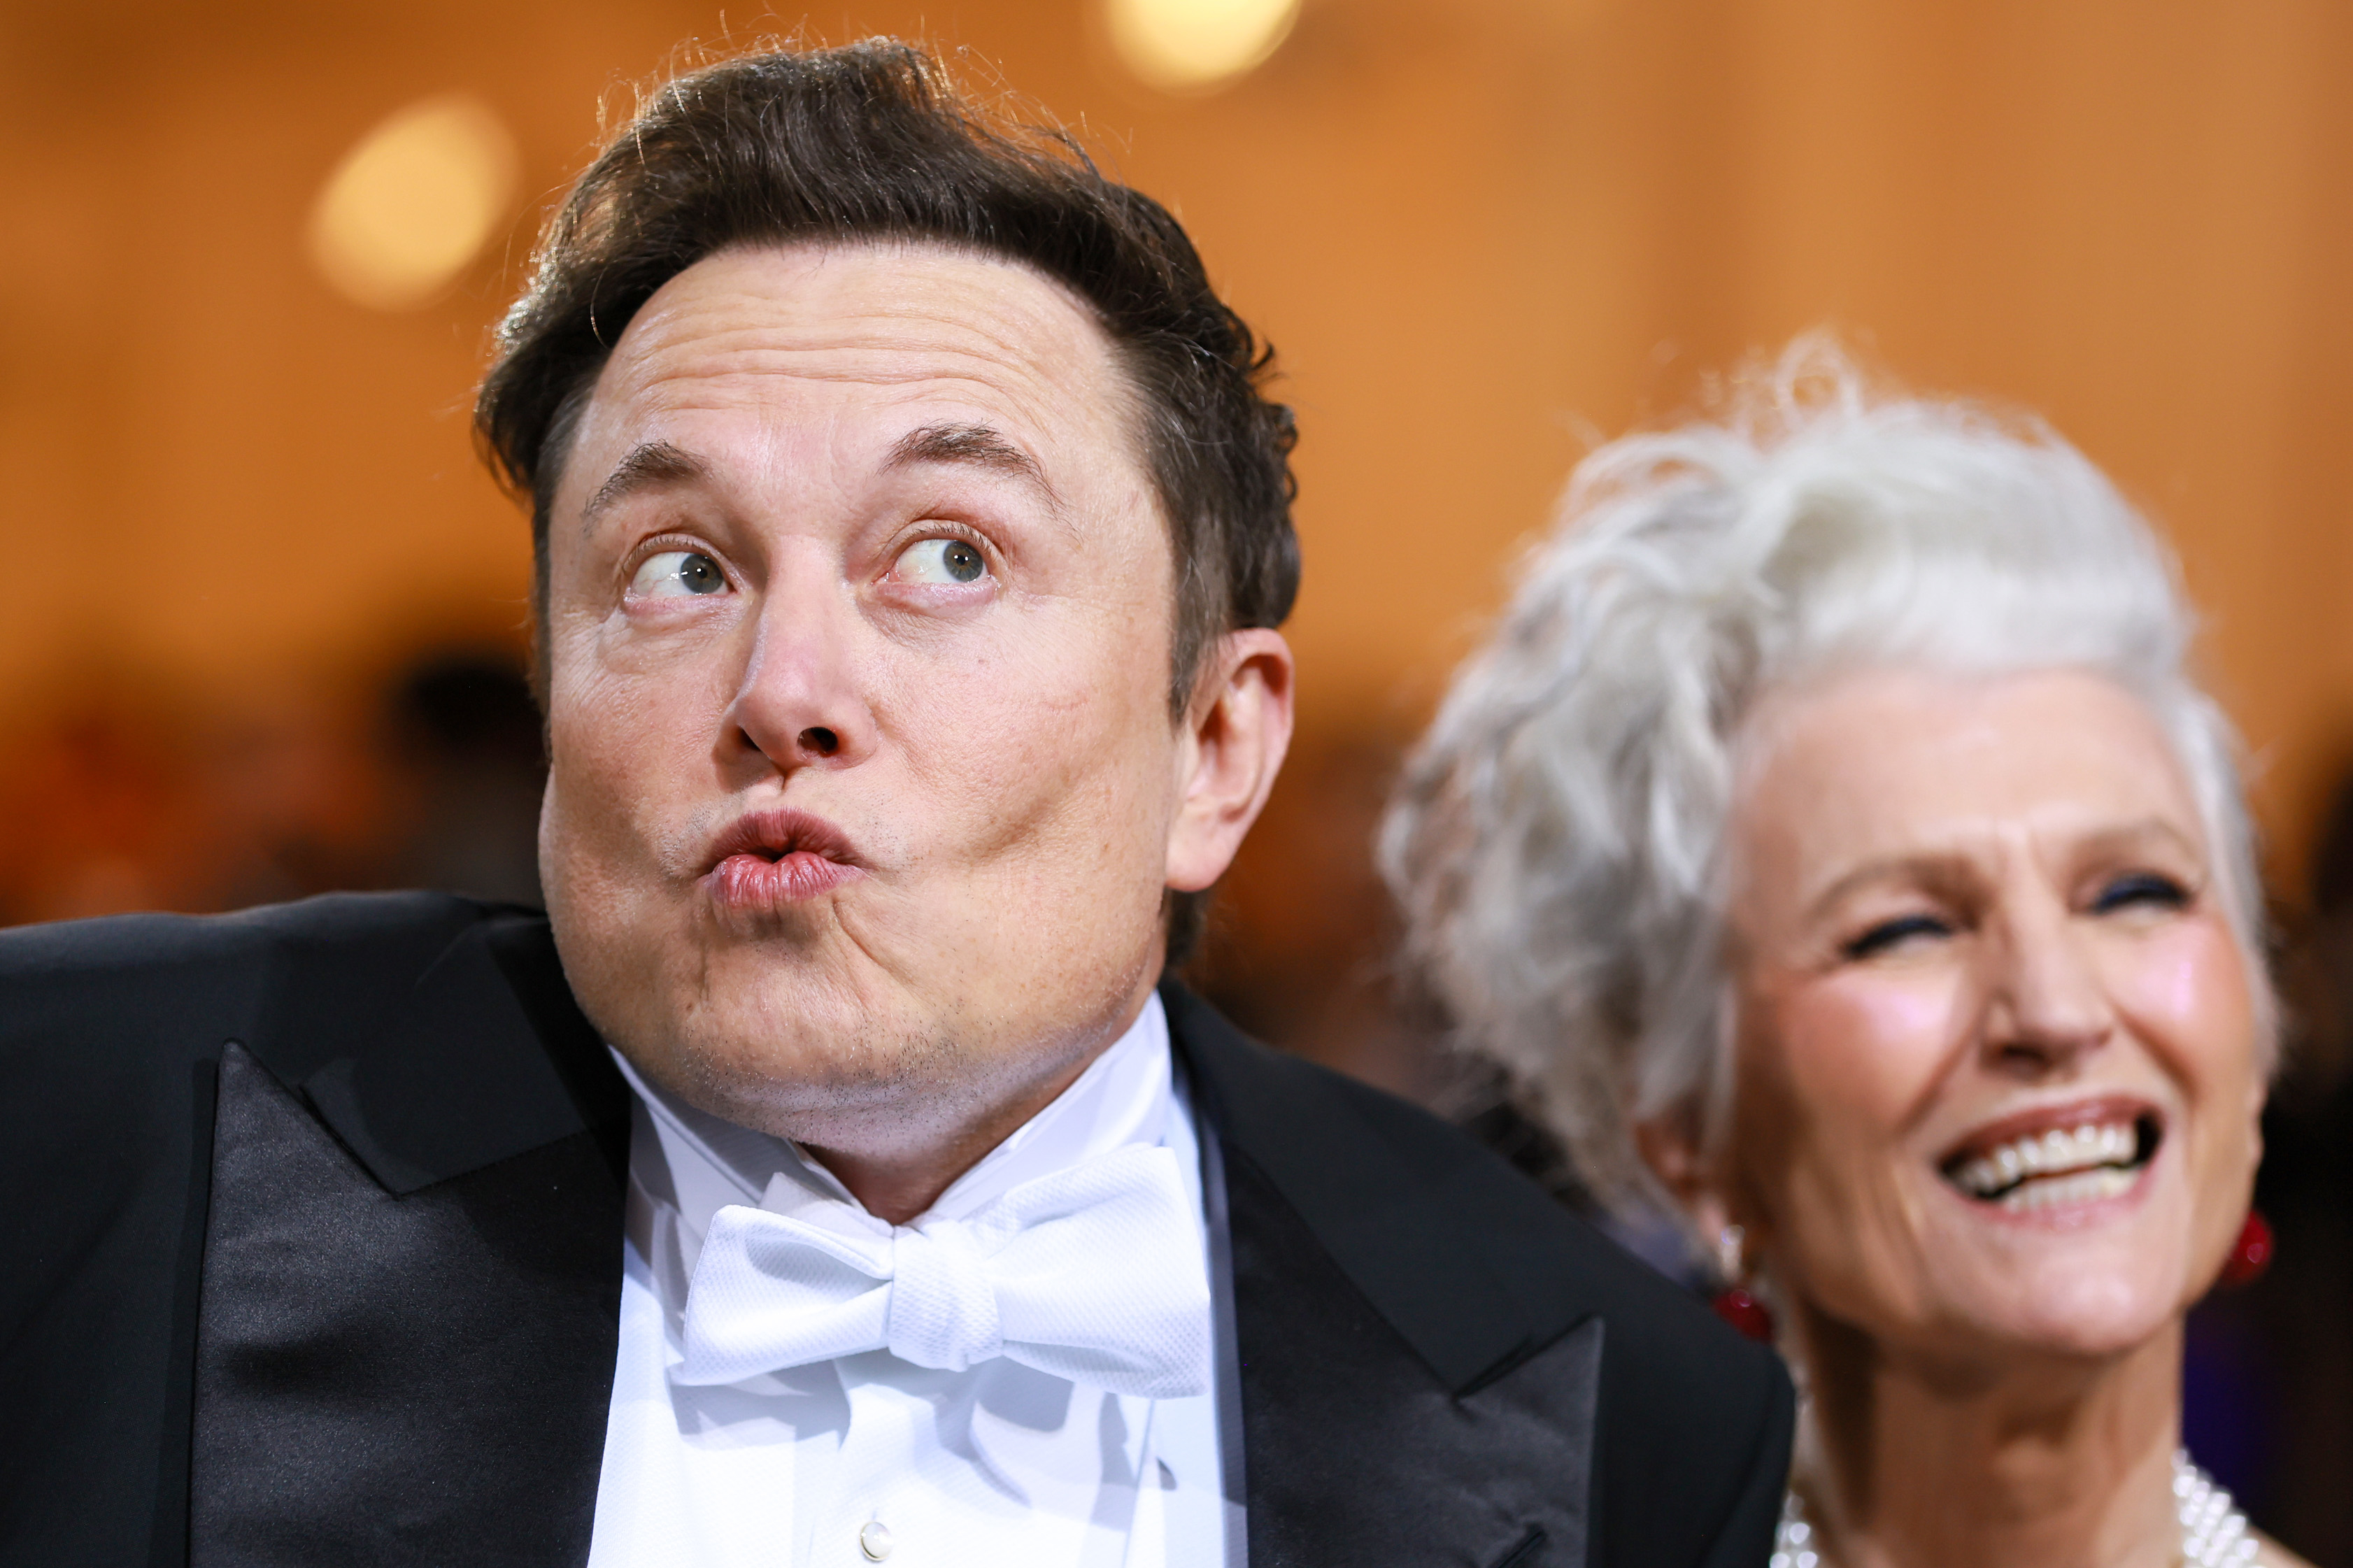 elon making a funny face